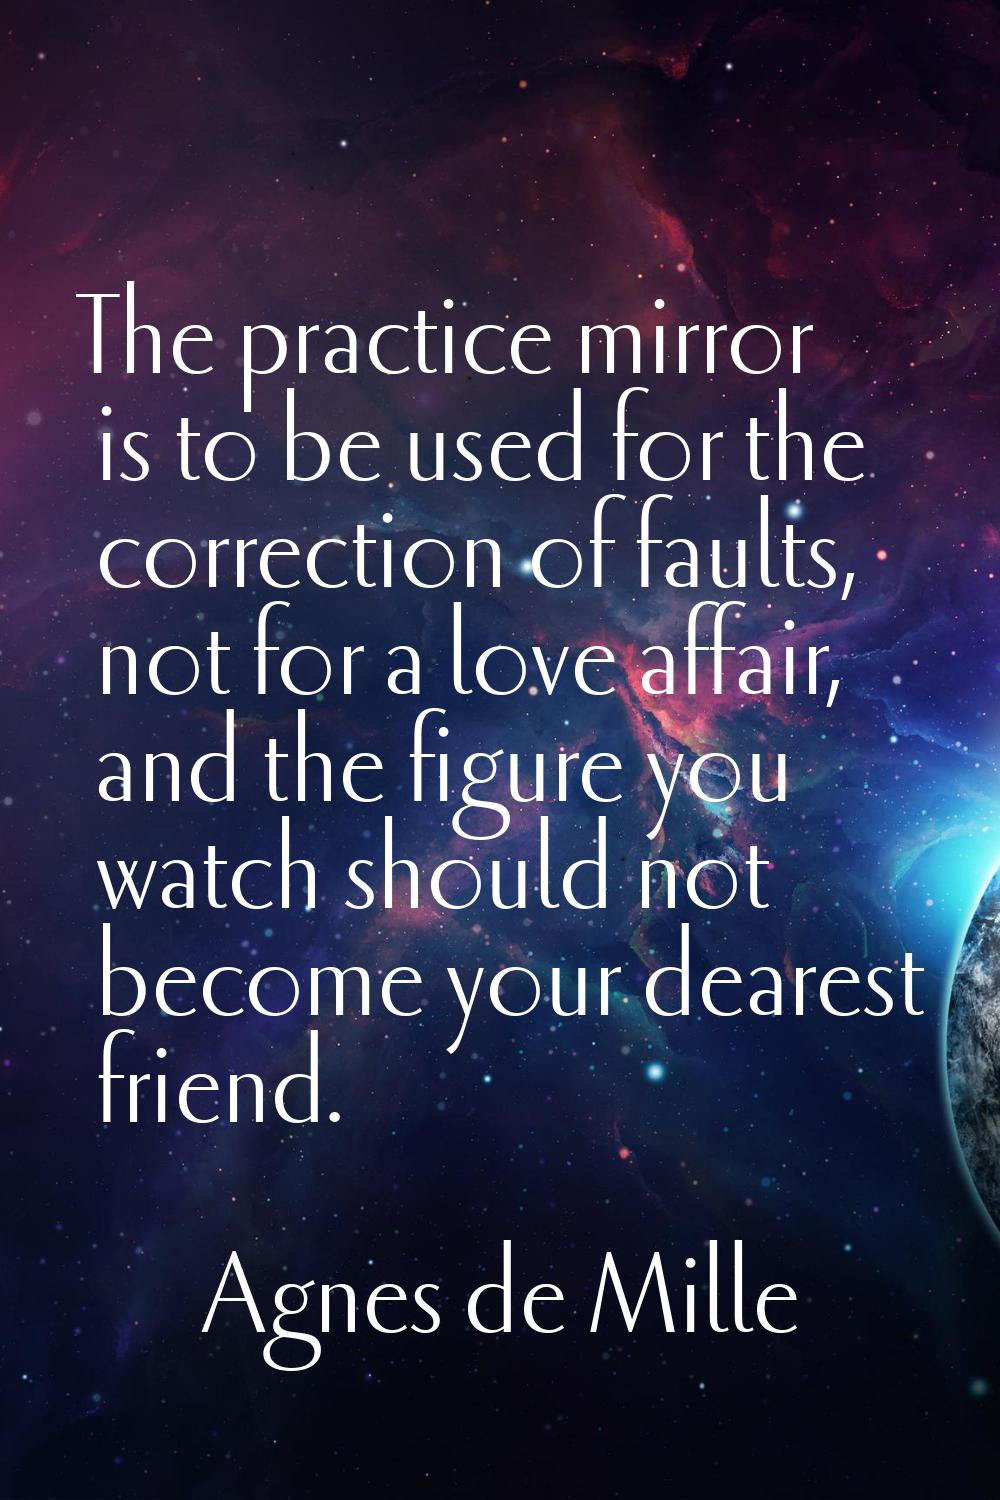 The practice mirror is to be used for the correction of faults, not for a love affair, and the figu